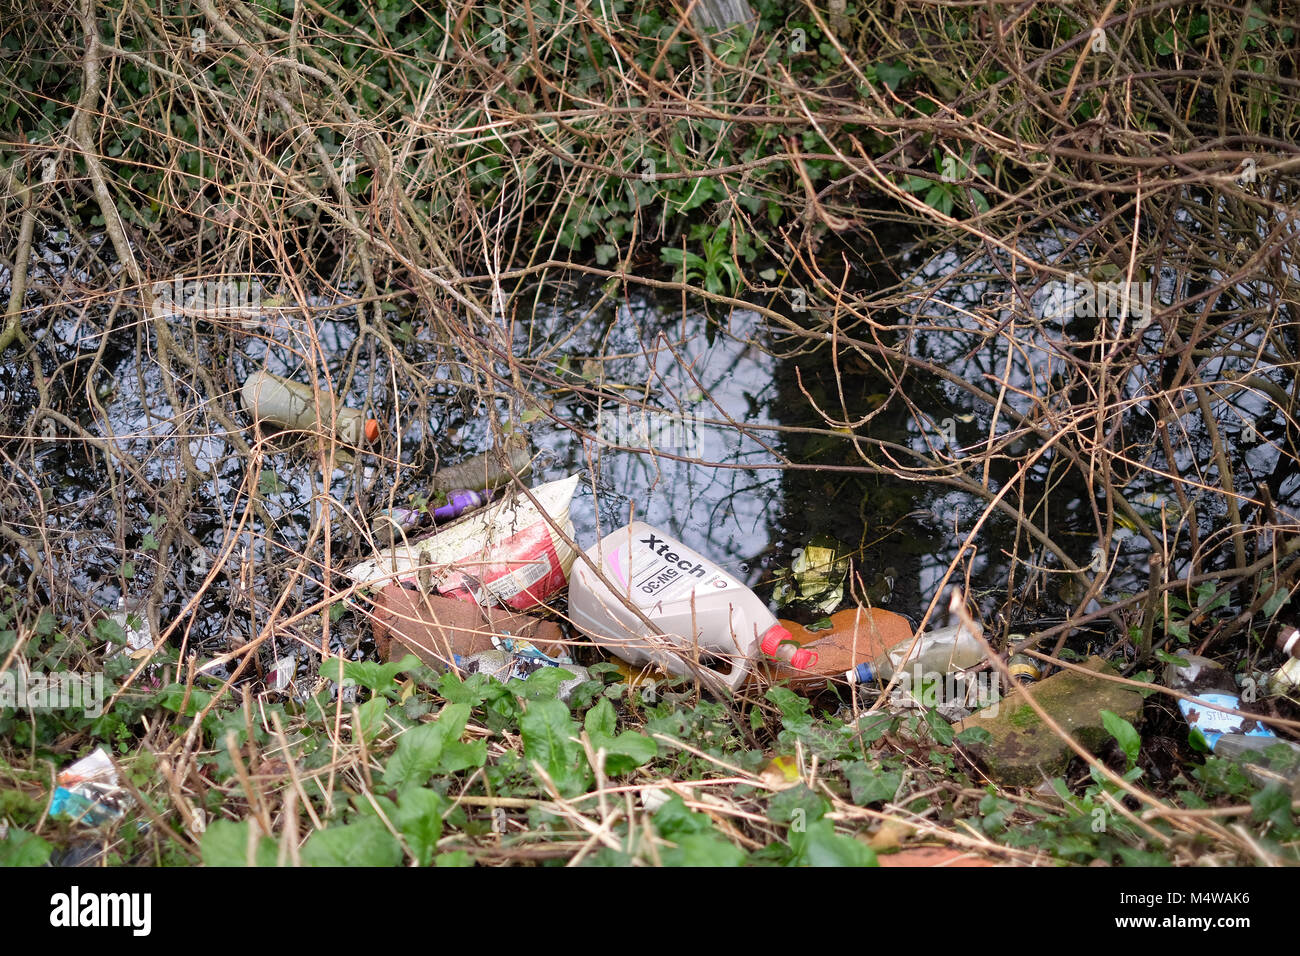 February 2018 - Rubbish and waste dumped in the beautiful Somerset rural countryside. Stock Photo